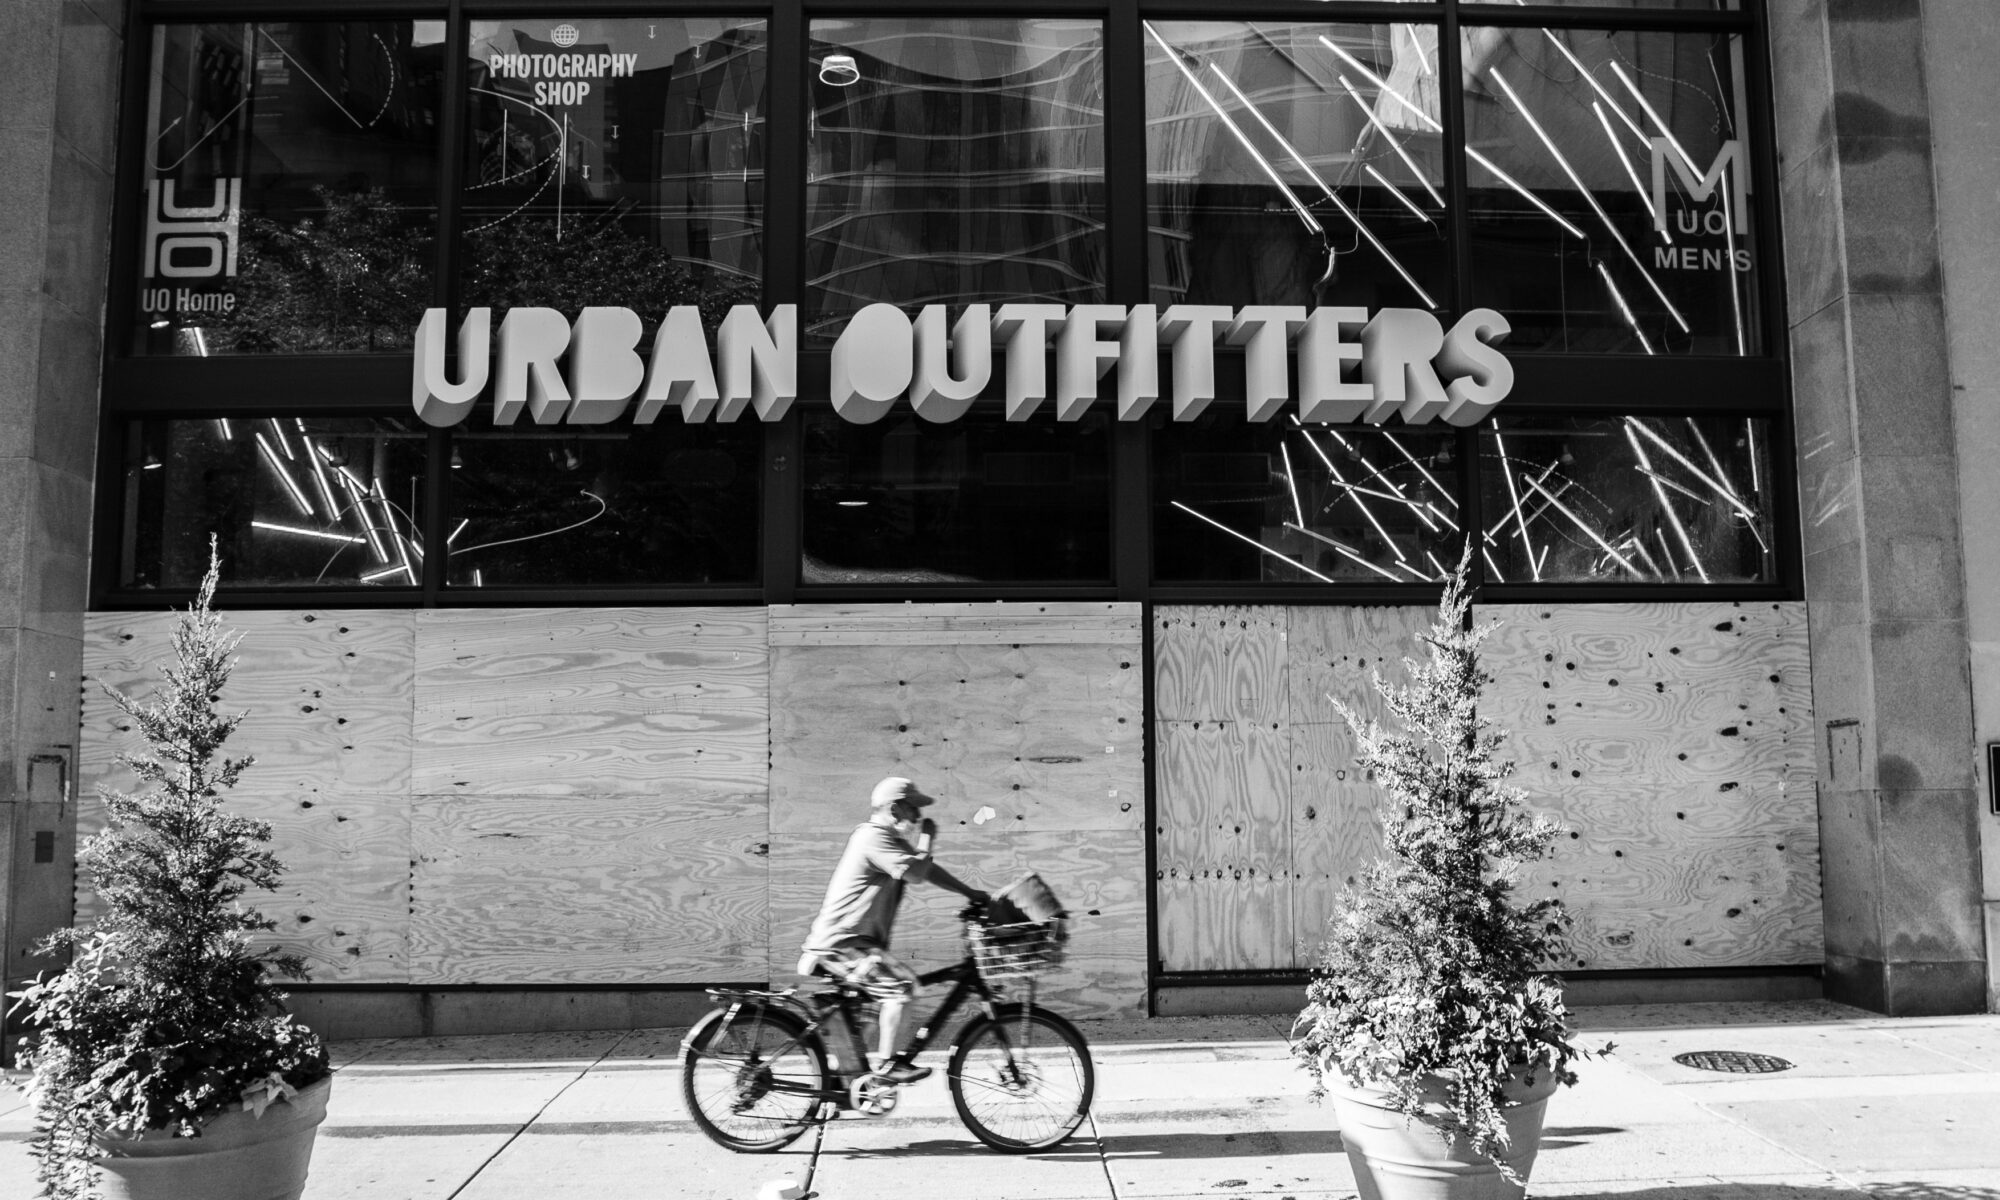 Closed urban outfitter shop